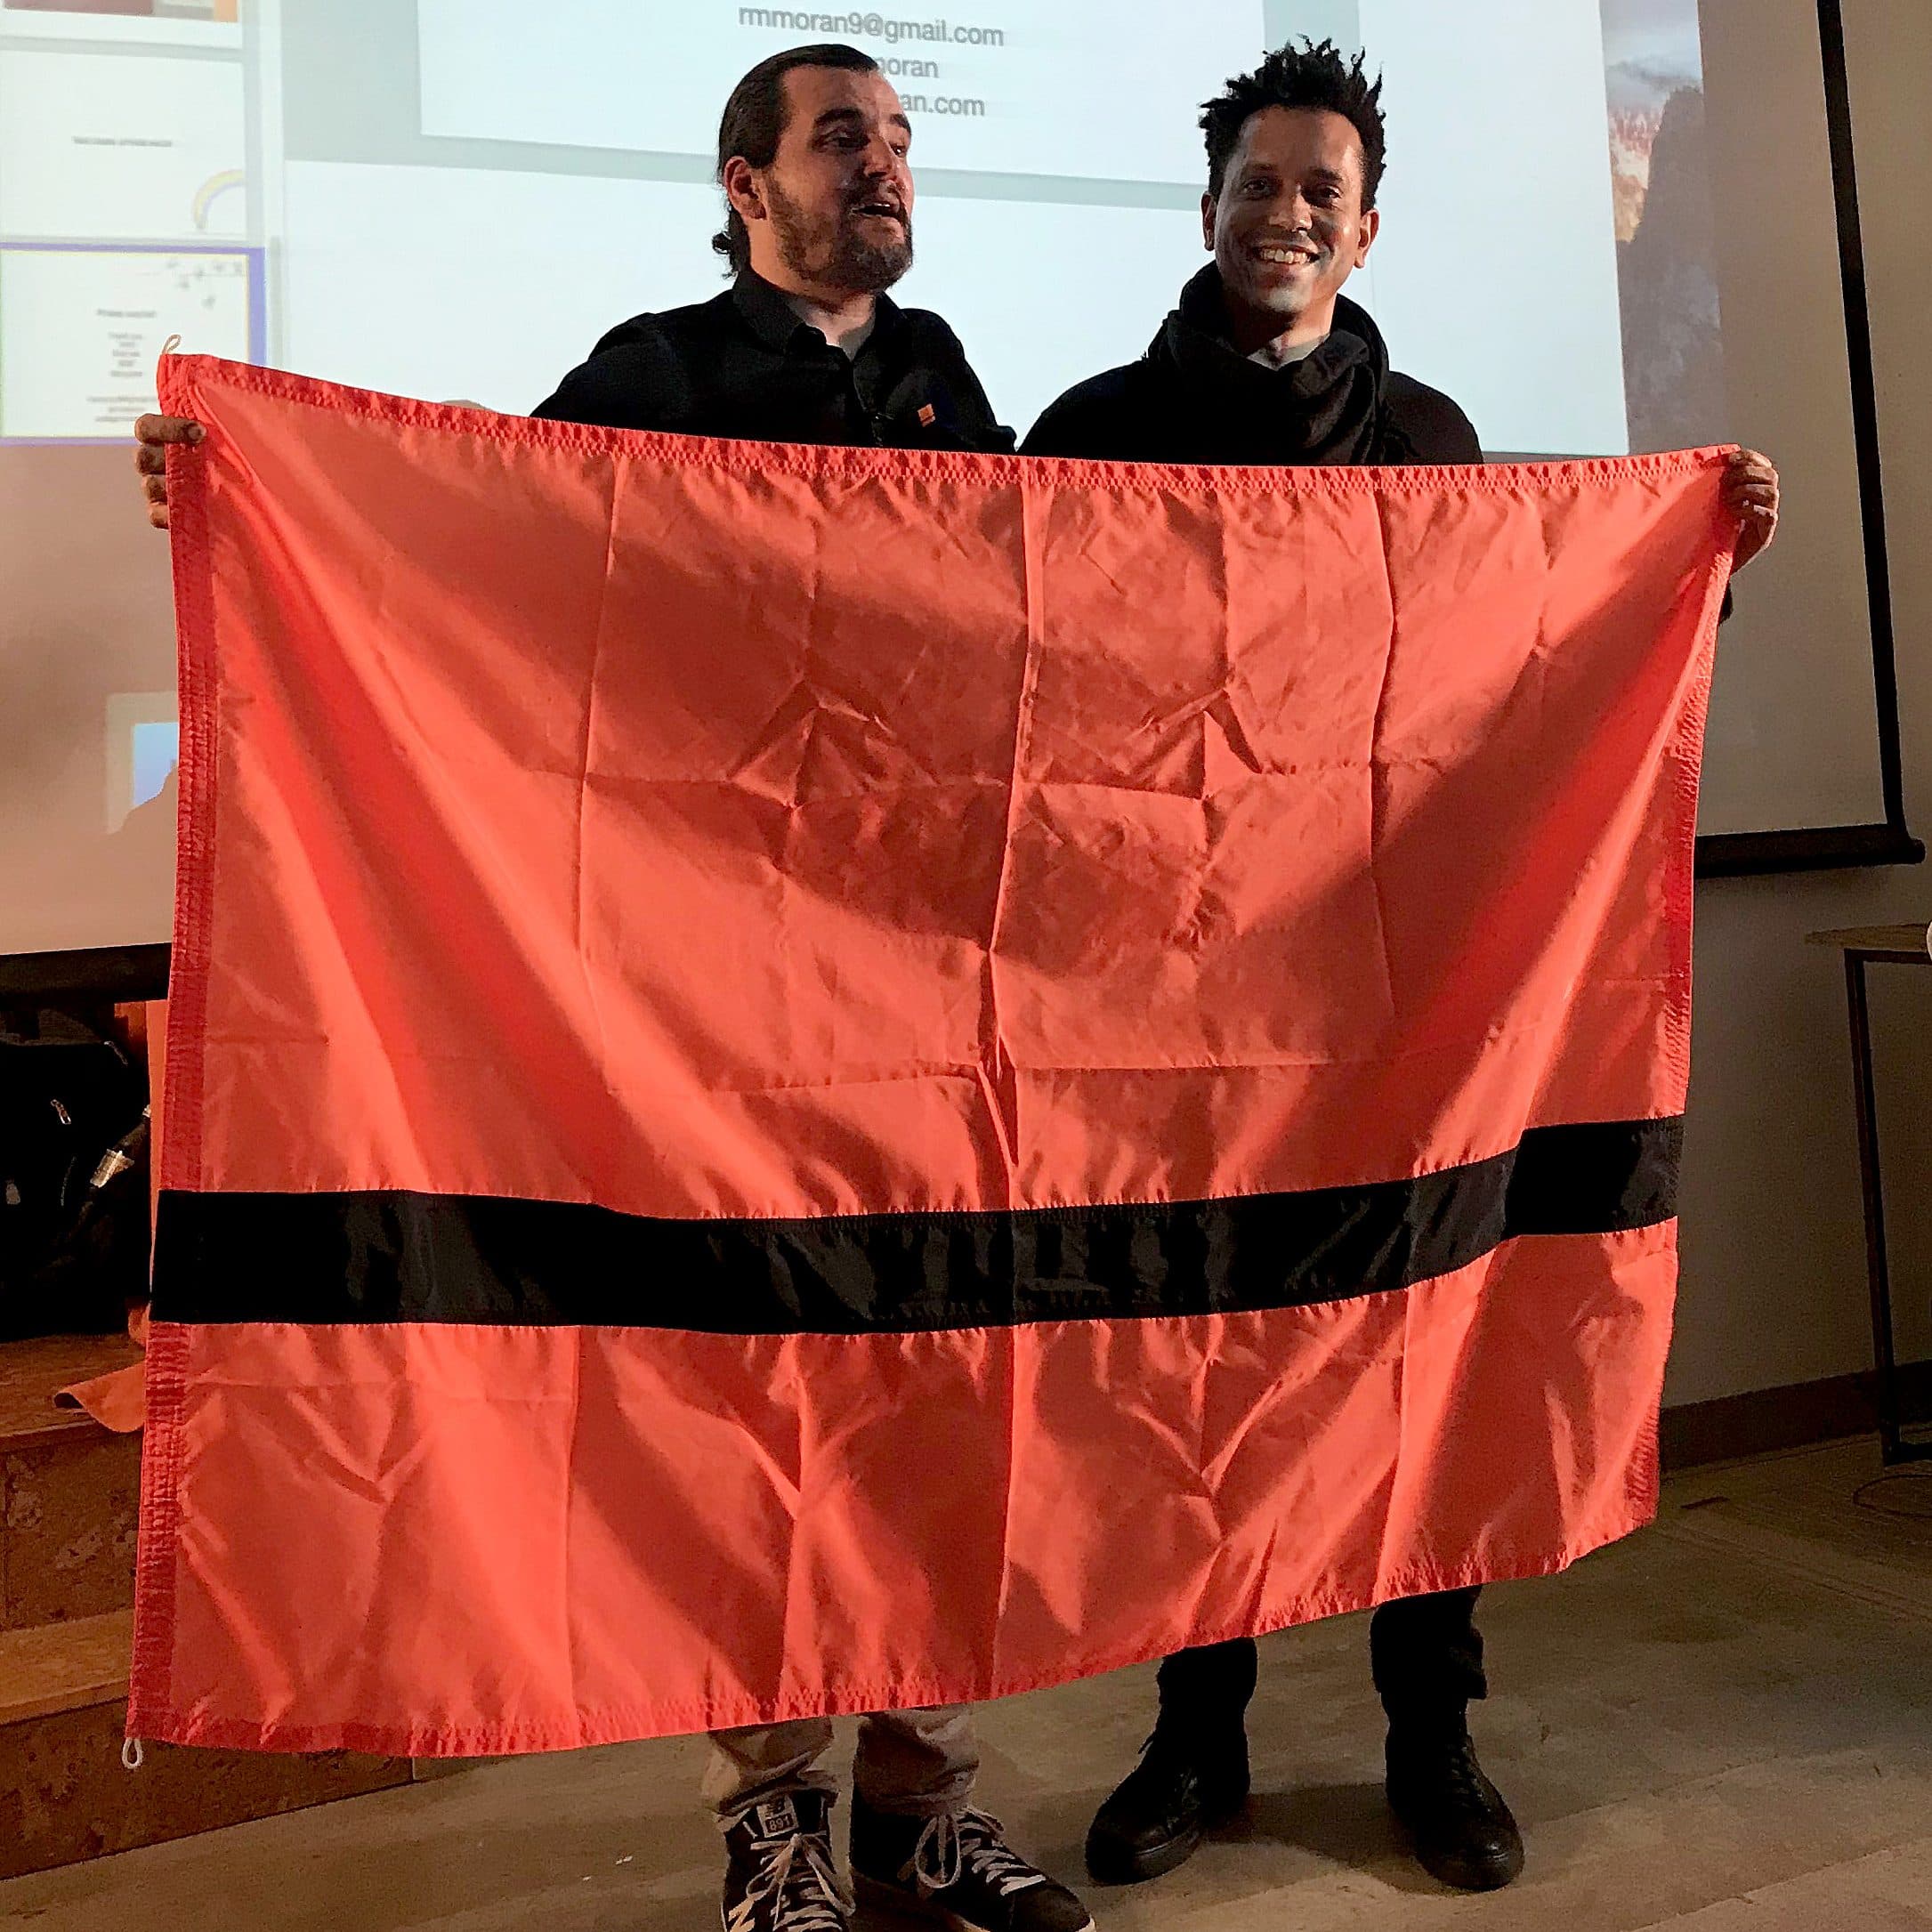 Two people stand indoors holding a large red flag with a thick black horizontal stripe in the center. They are smiling, and a projector screen displaying an email address is visible behind them. Both are casually dressed, one in a black hoodie and the other in a black shirt.